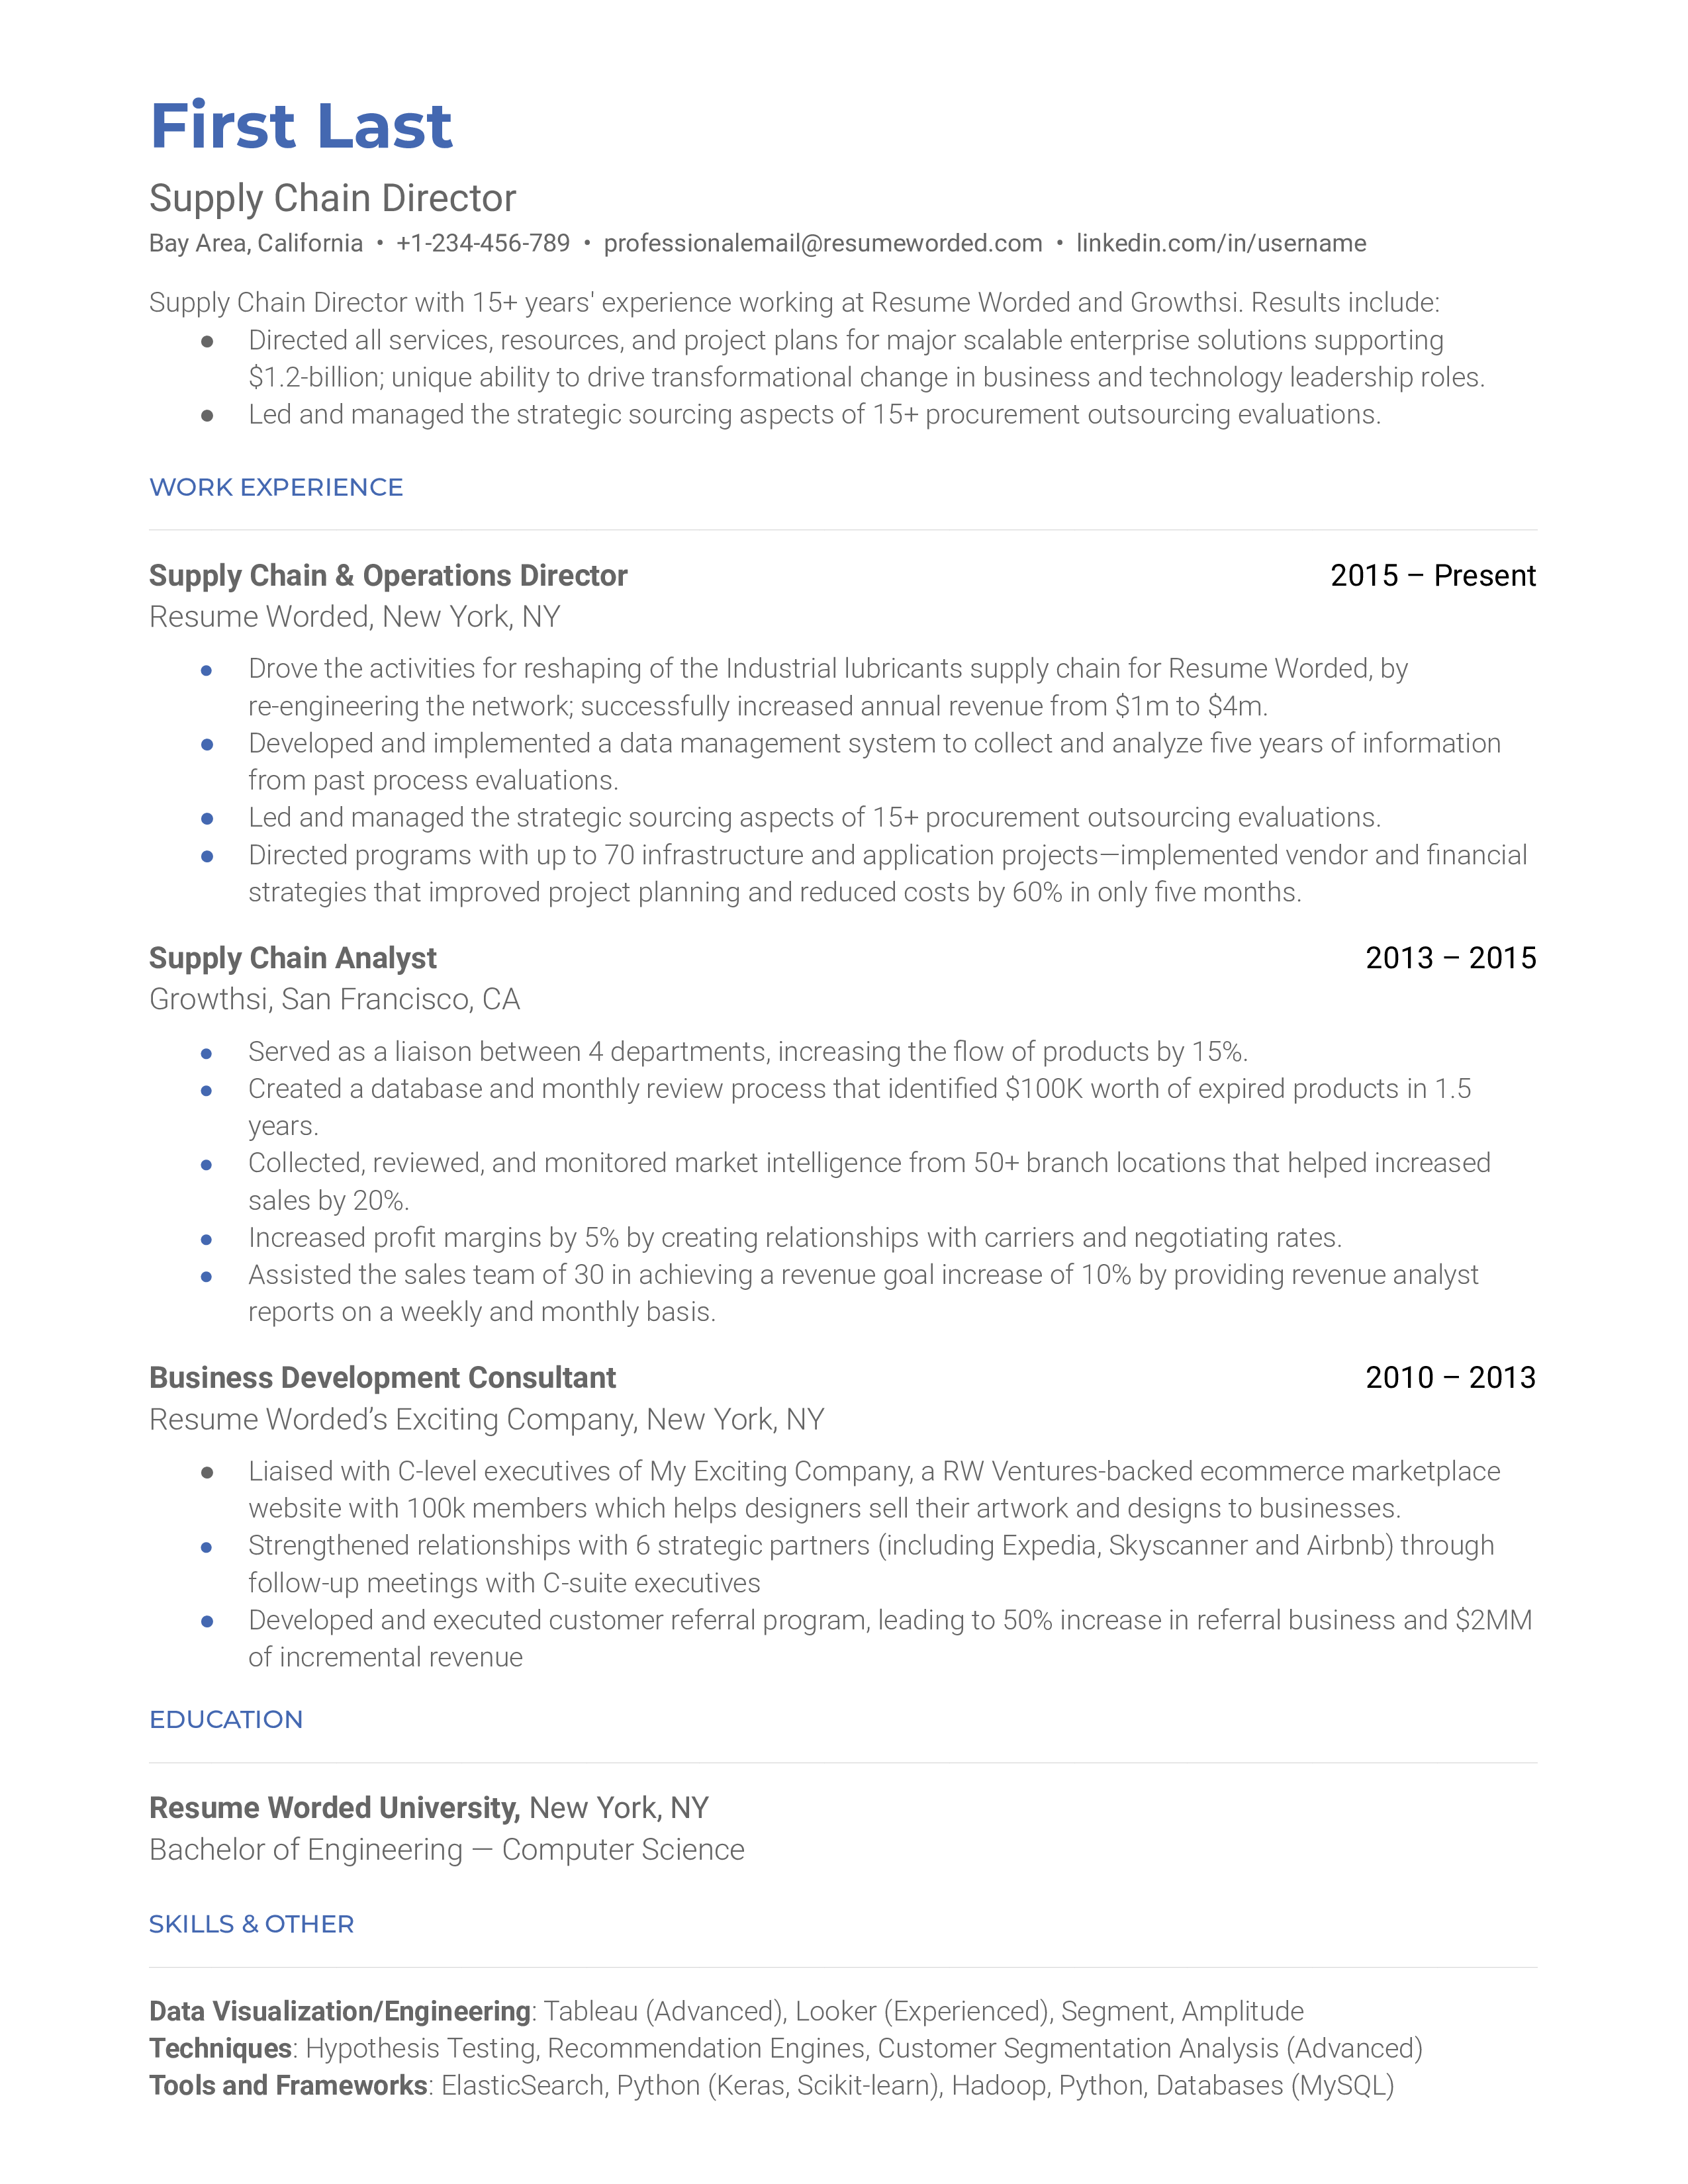 Director of Supply Chain Management Resume Sample